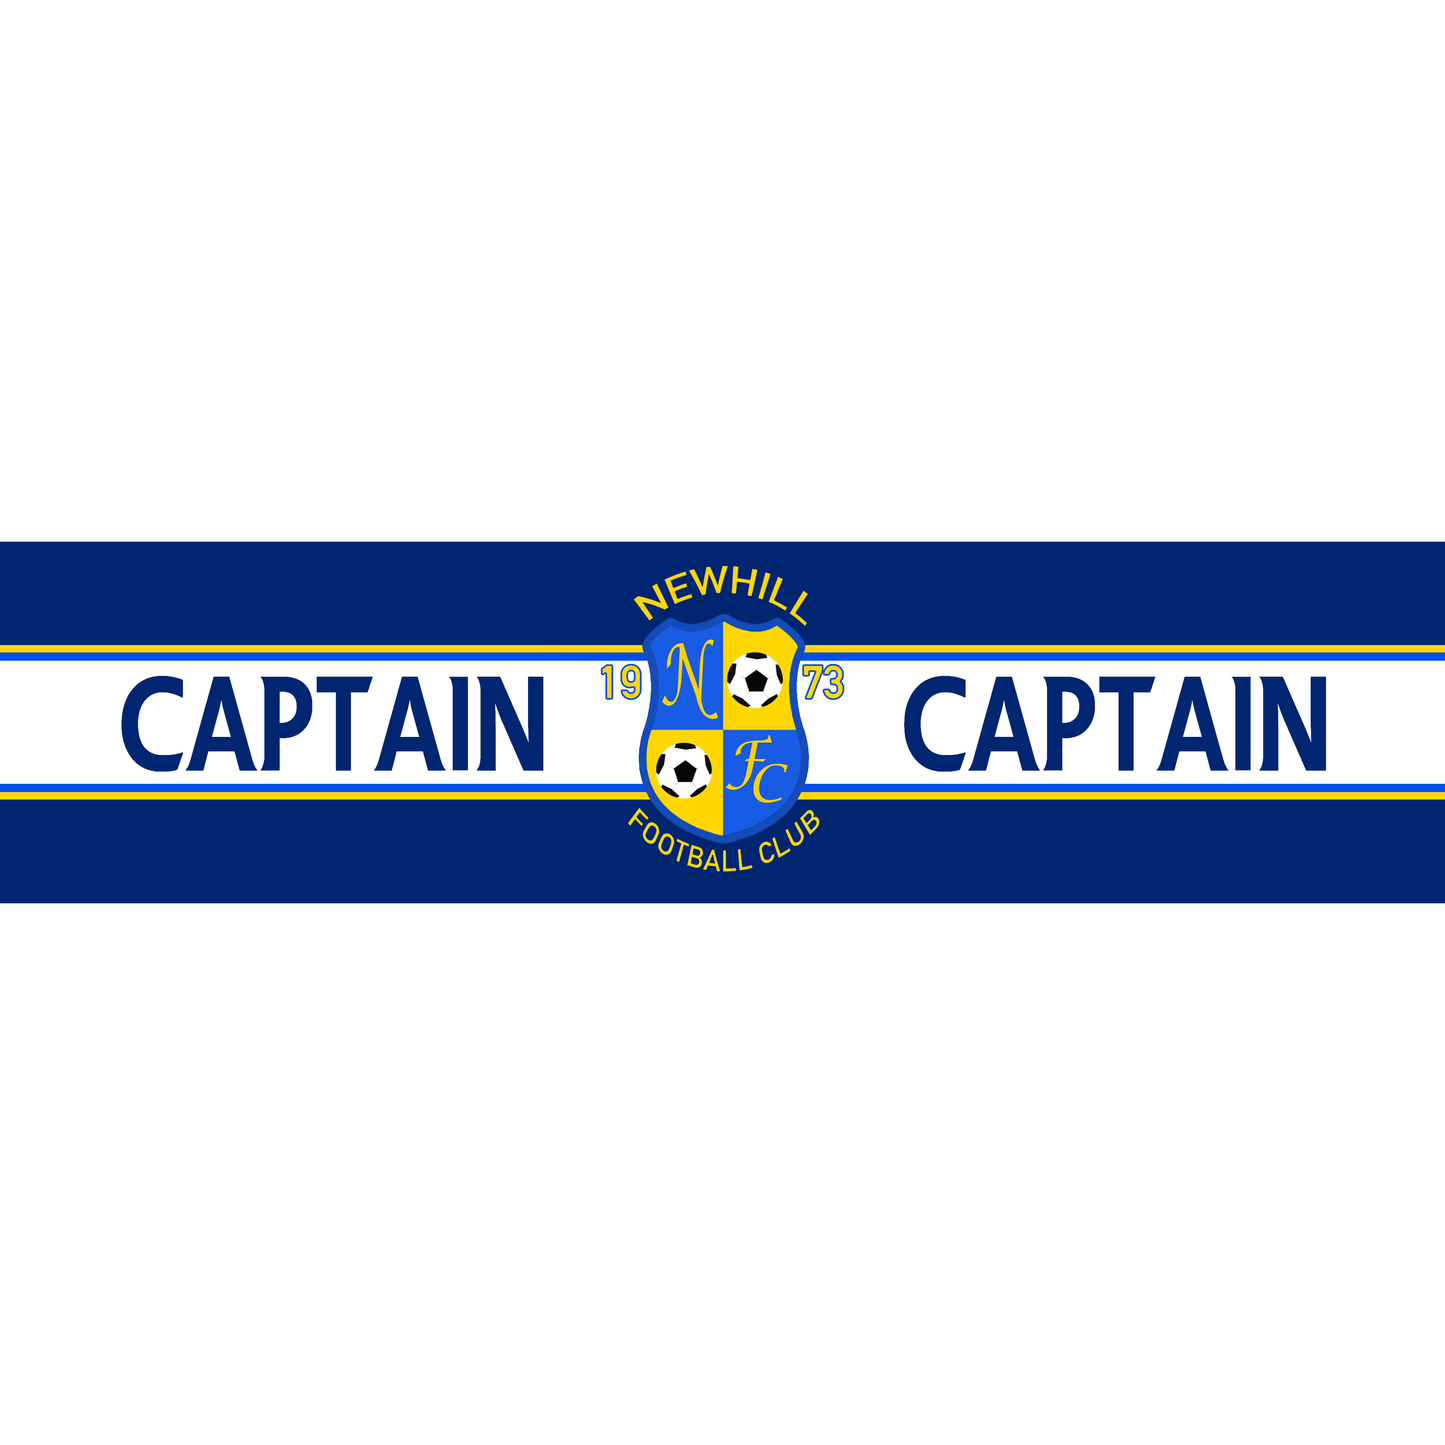 Newhill FC Captains Armband